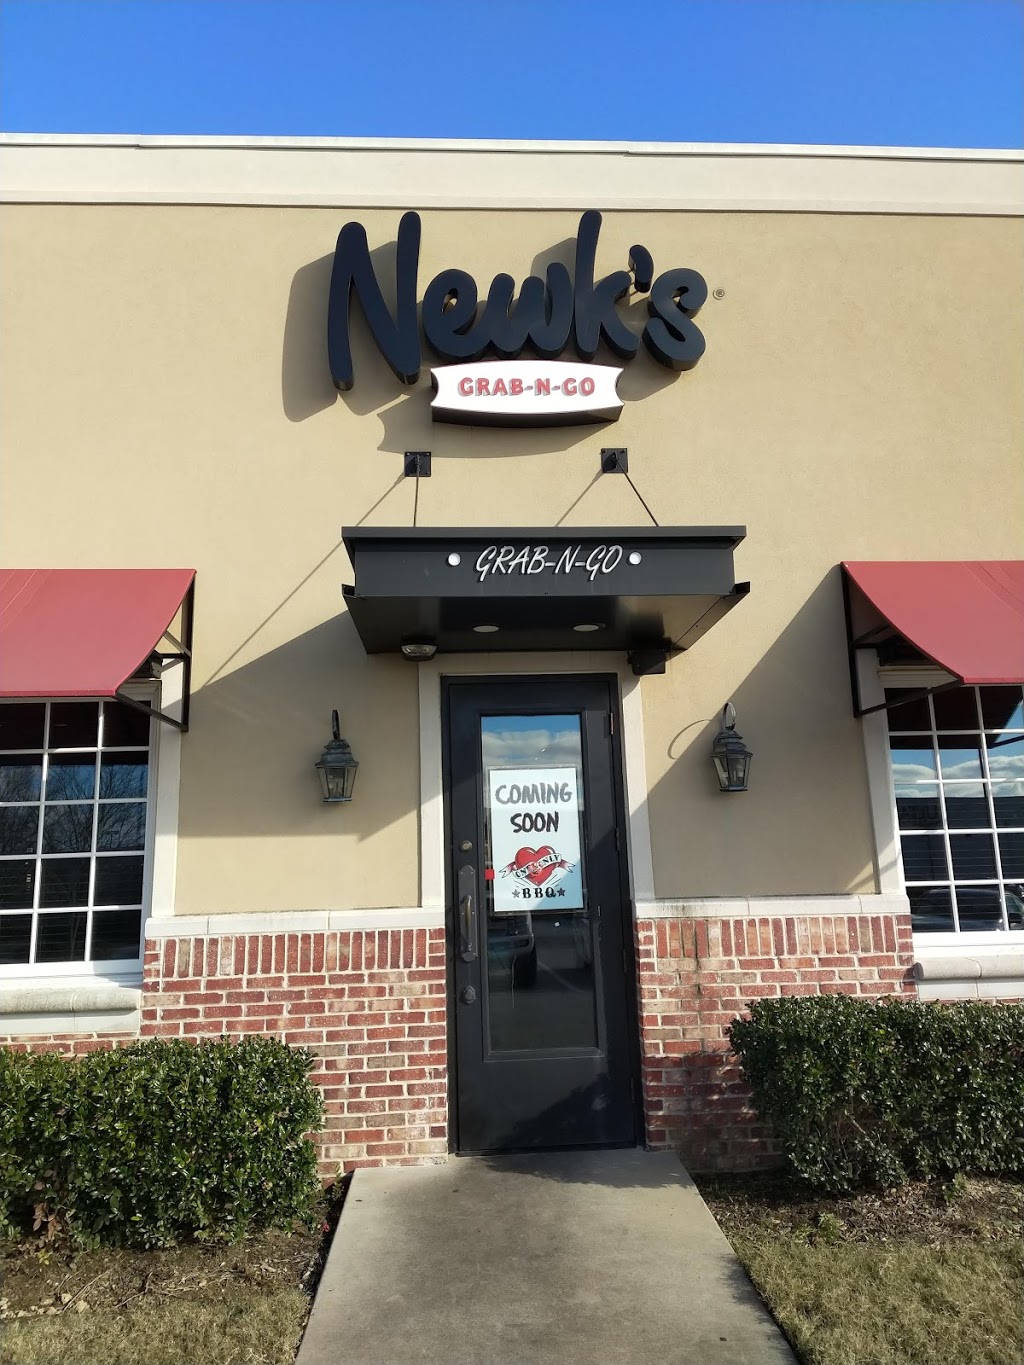 Newks Eatery | restaurant | 6575 Airways Blvd, Southaven, MS 38671, USA | 6627725822 OR +1 662-772-5822